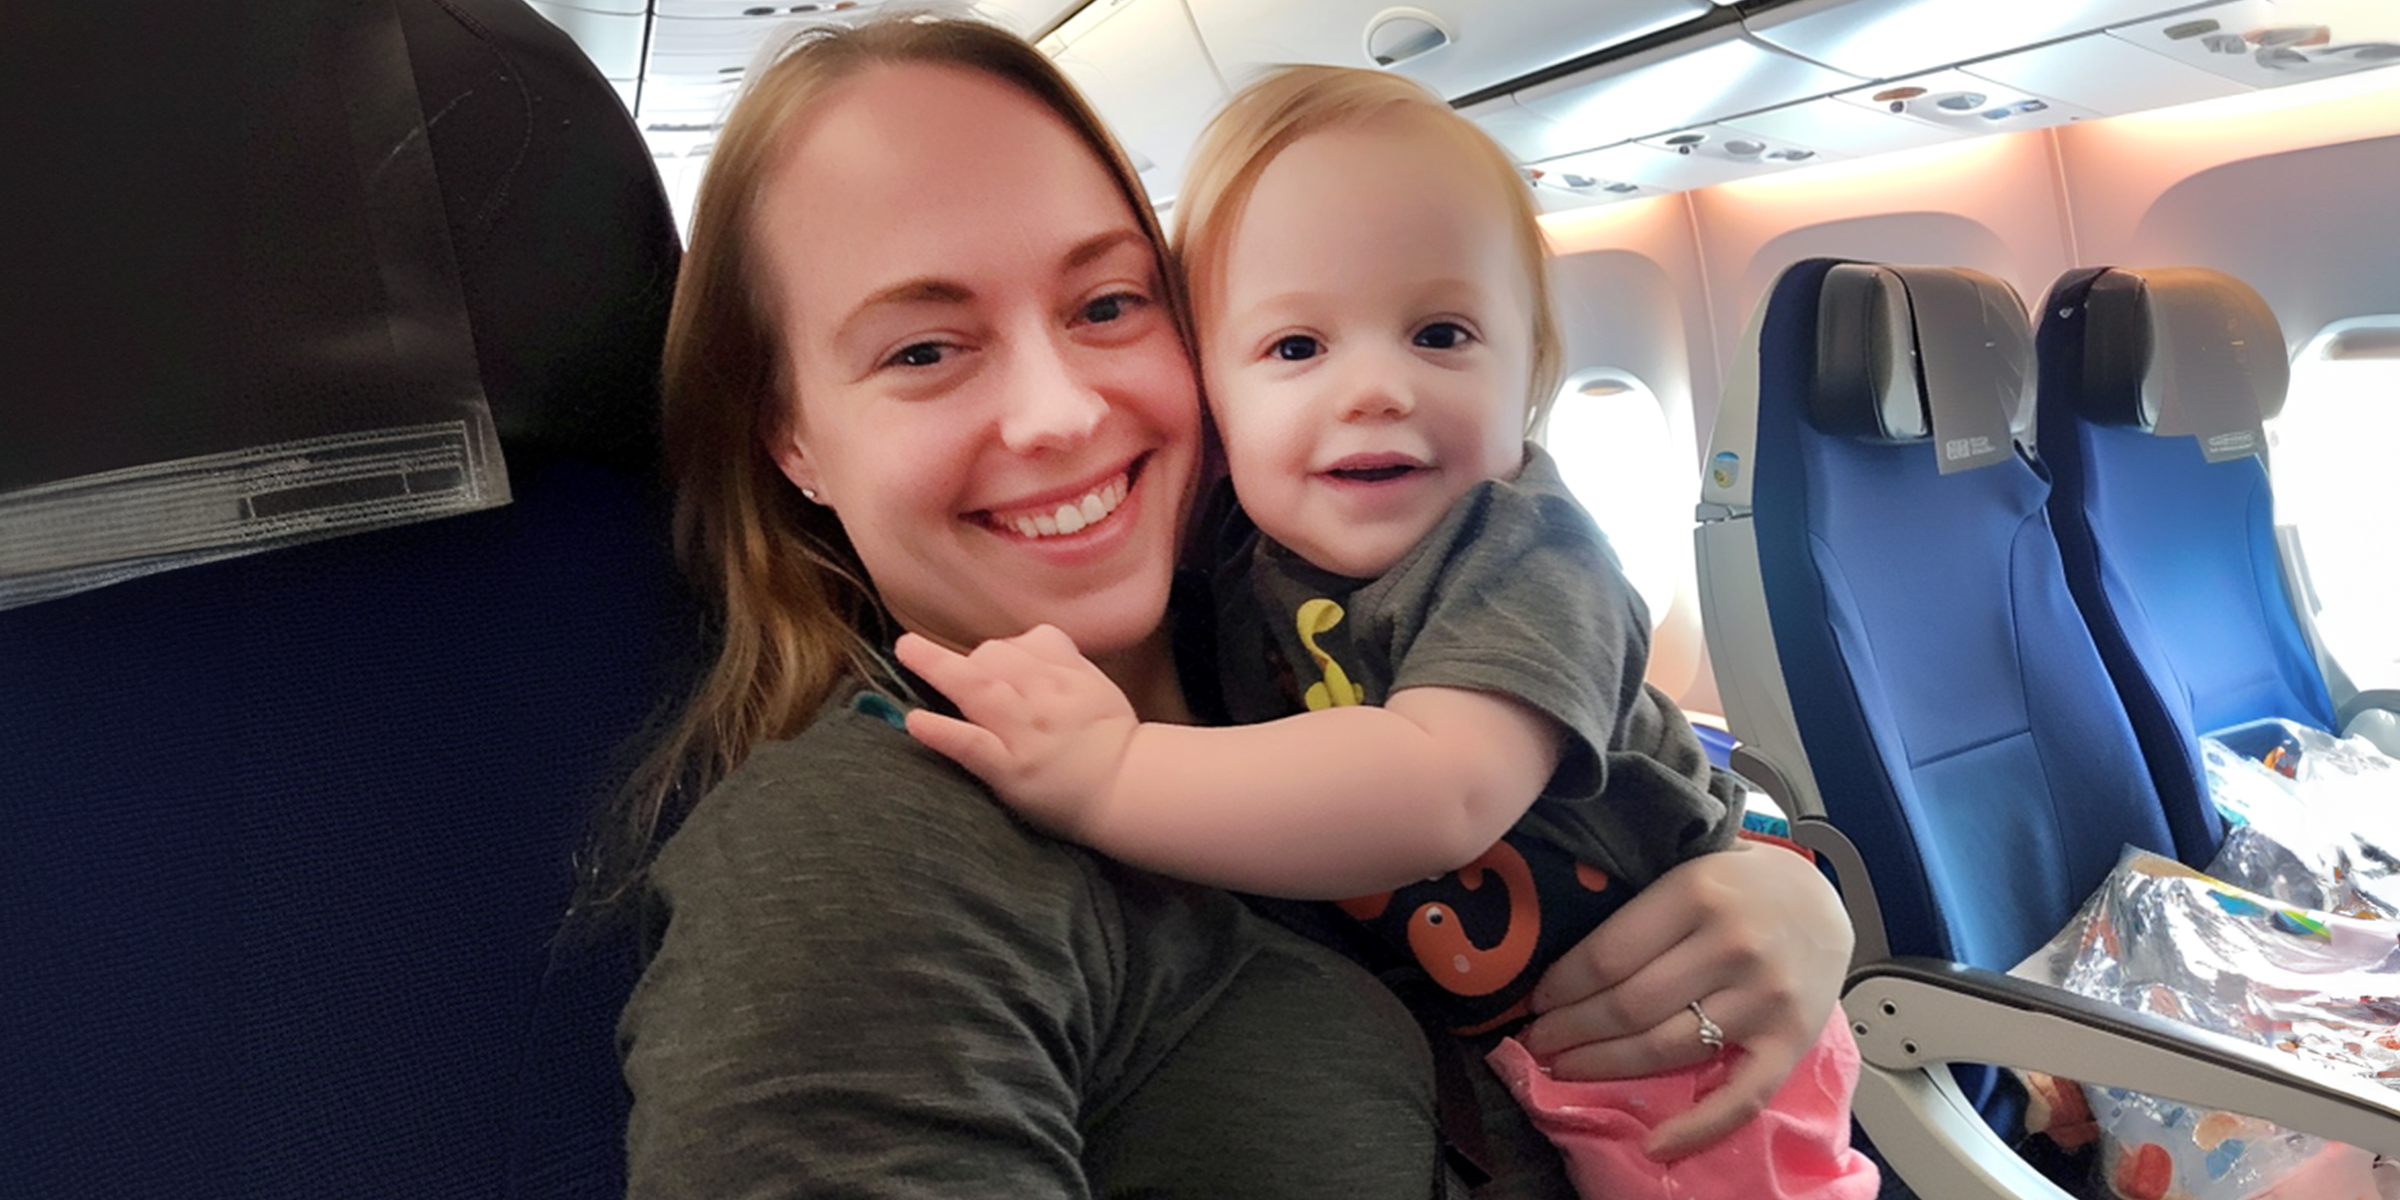 A mom and toddler in an airplane | Source: AmoMama